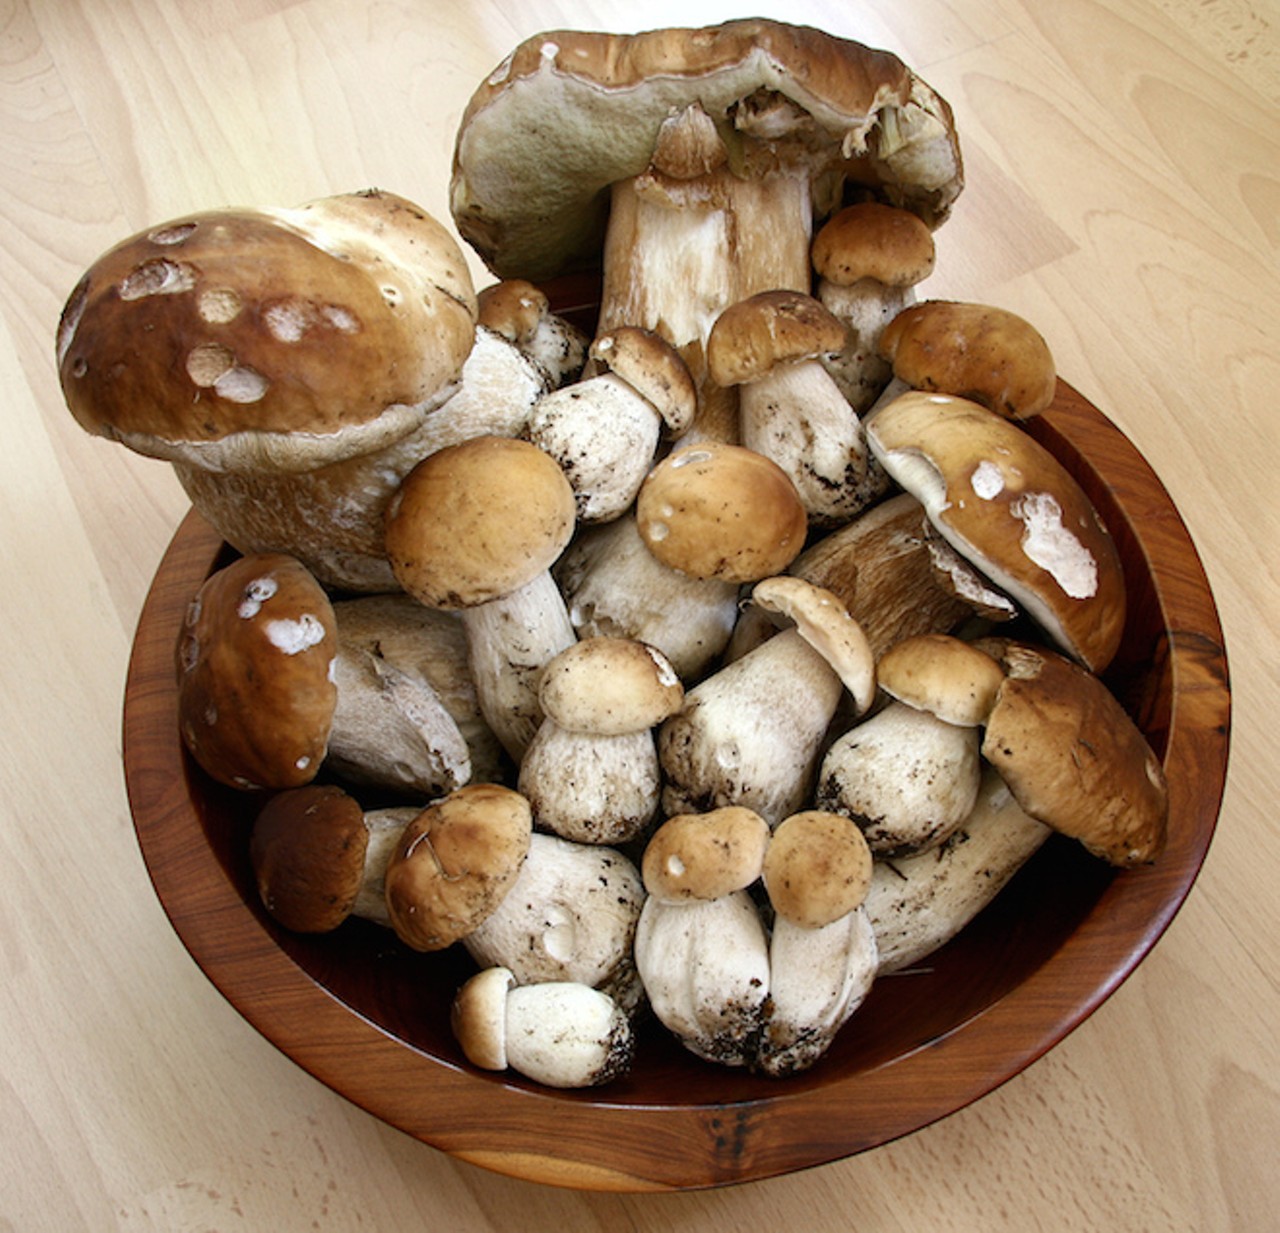 Saturday, May 24Edible Mushrooms of Central FloridaLearn to identify and grow edible and medicinal mushrooms with Terry Meer.